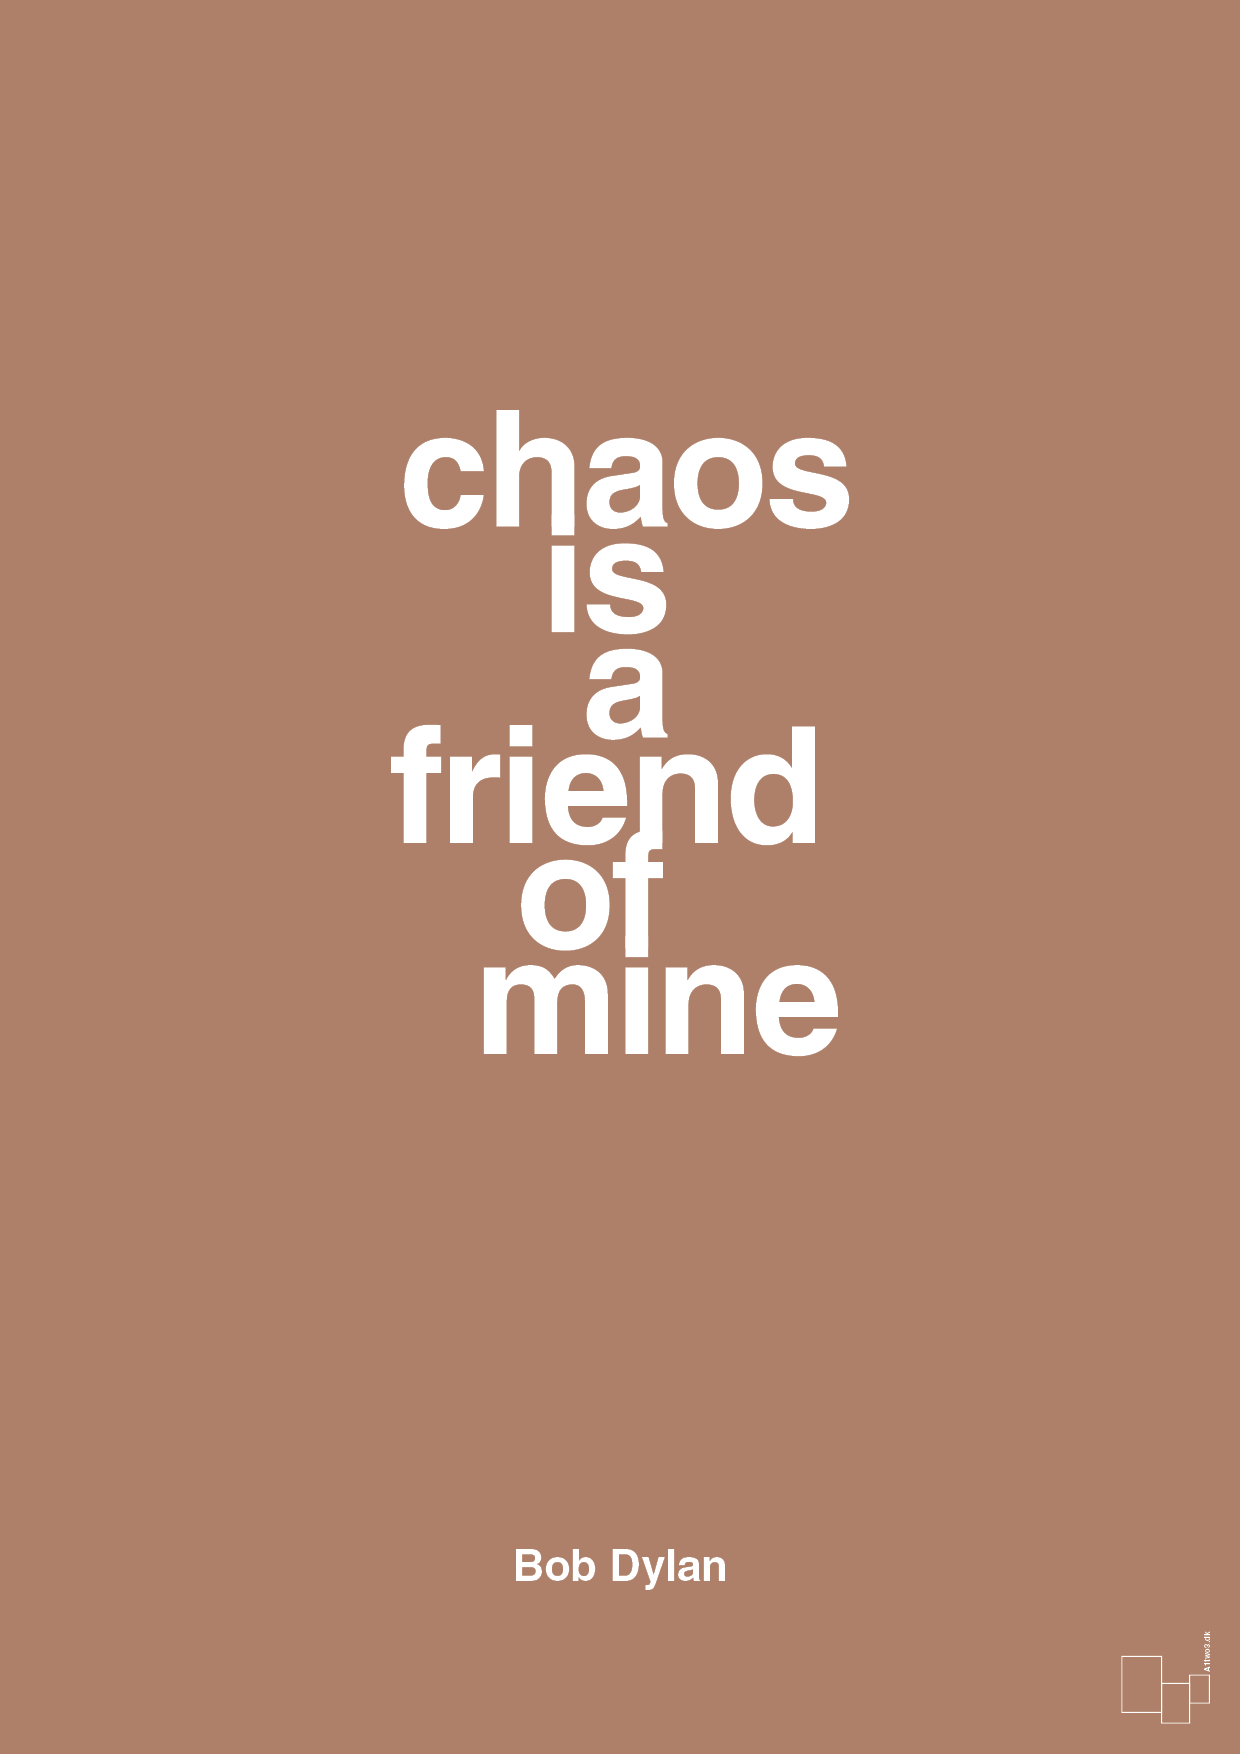 chaos is a friend of mine - Plakat med Citater i Cider Spice